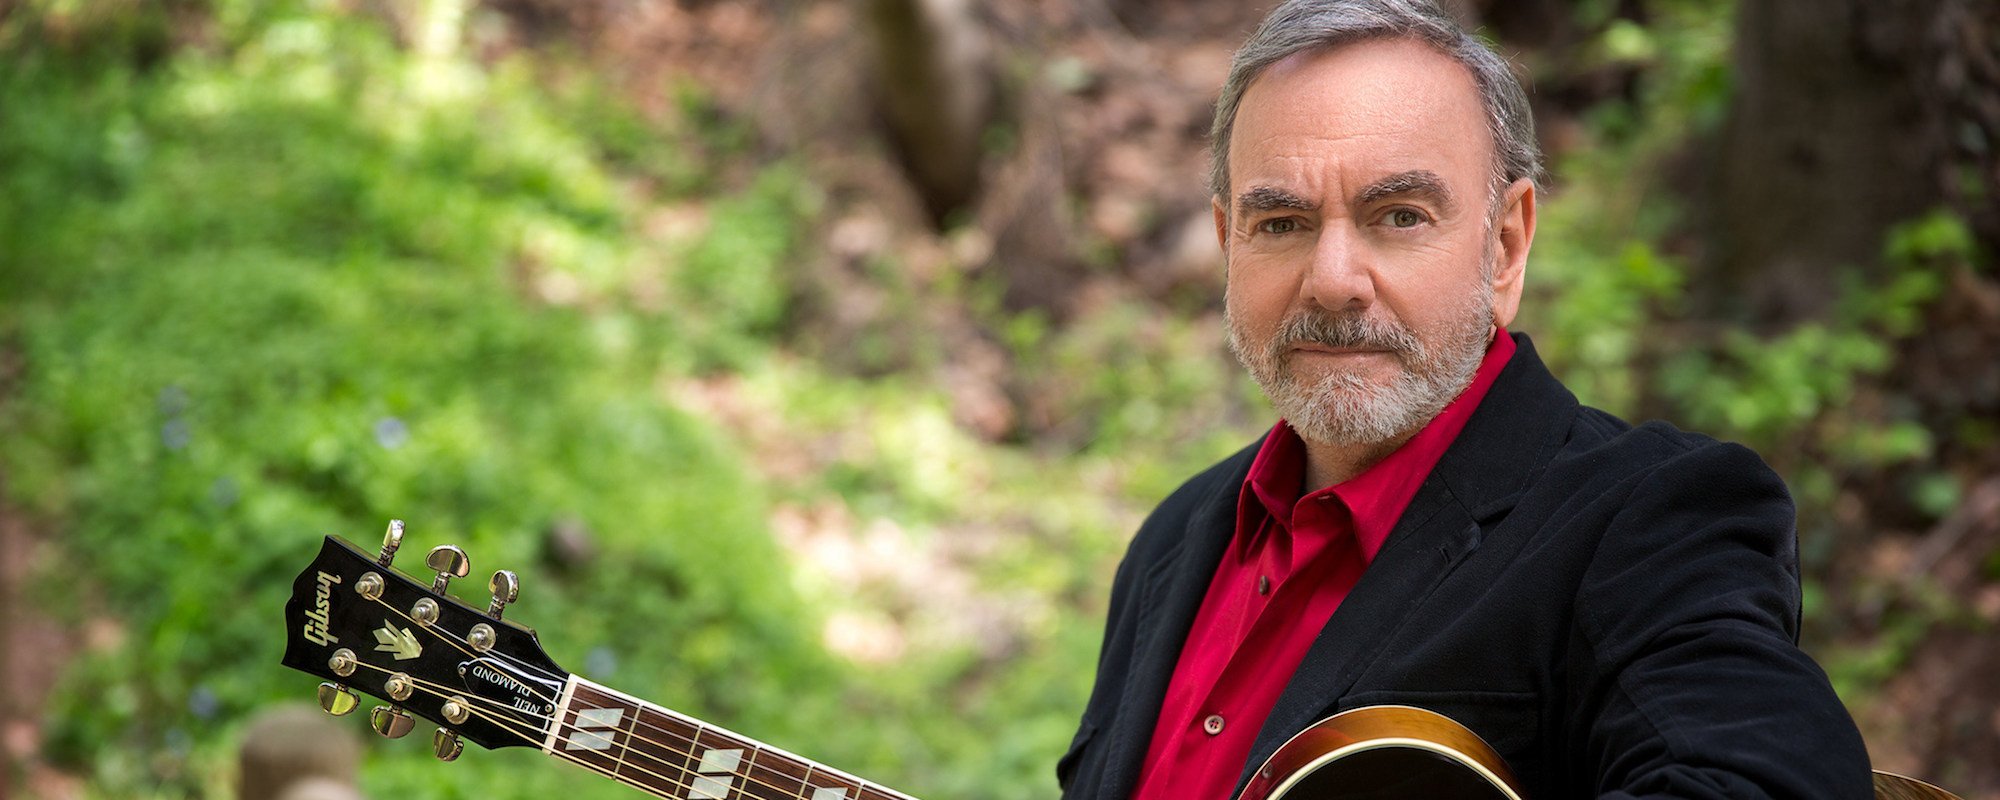 8 Songs You Didn't Know Neil Diamond Wrote That Were Made Famous By Other Artists